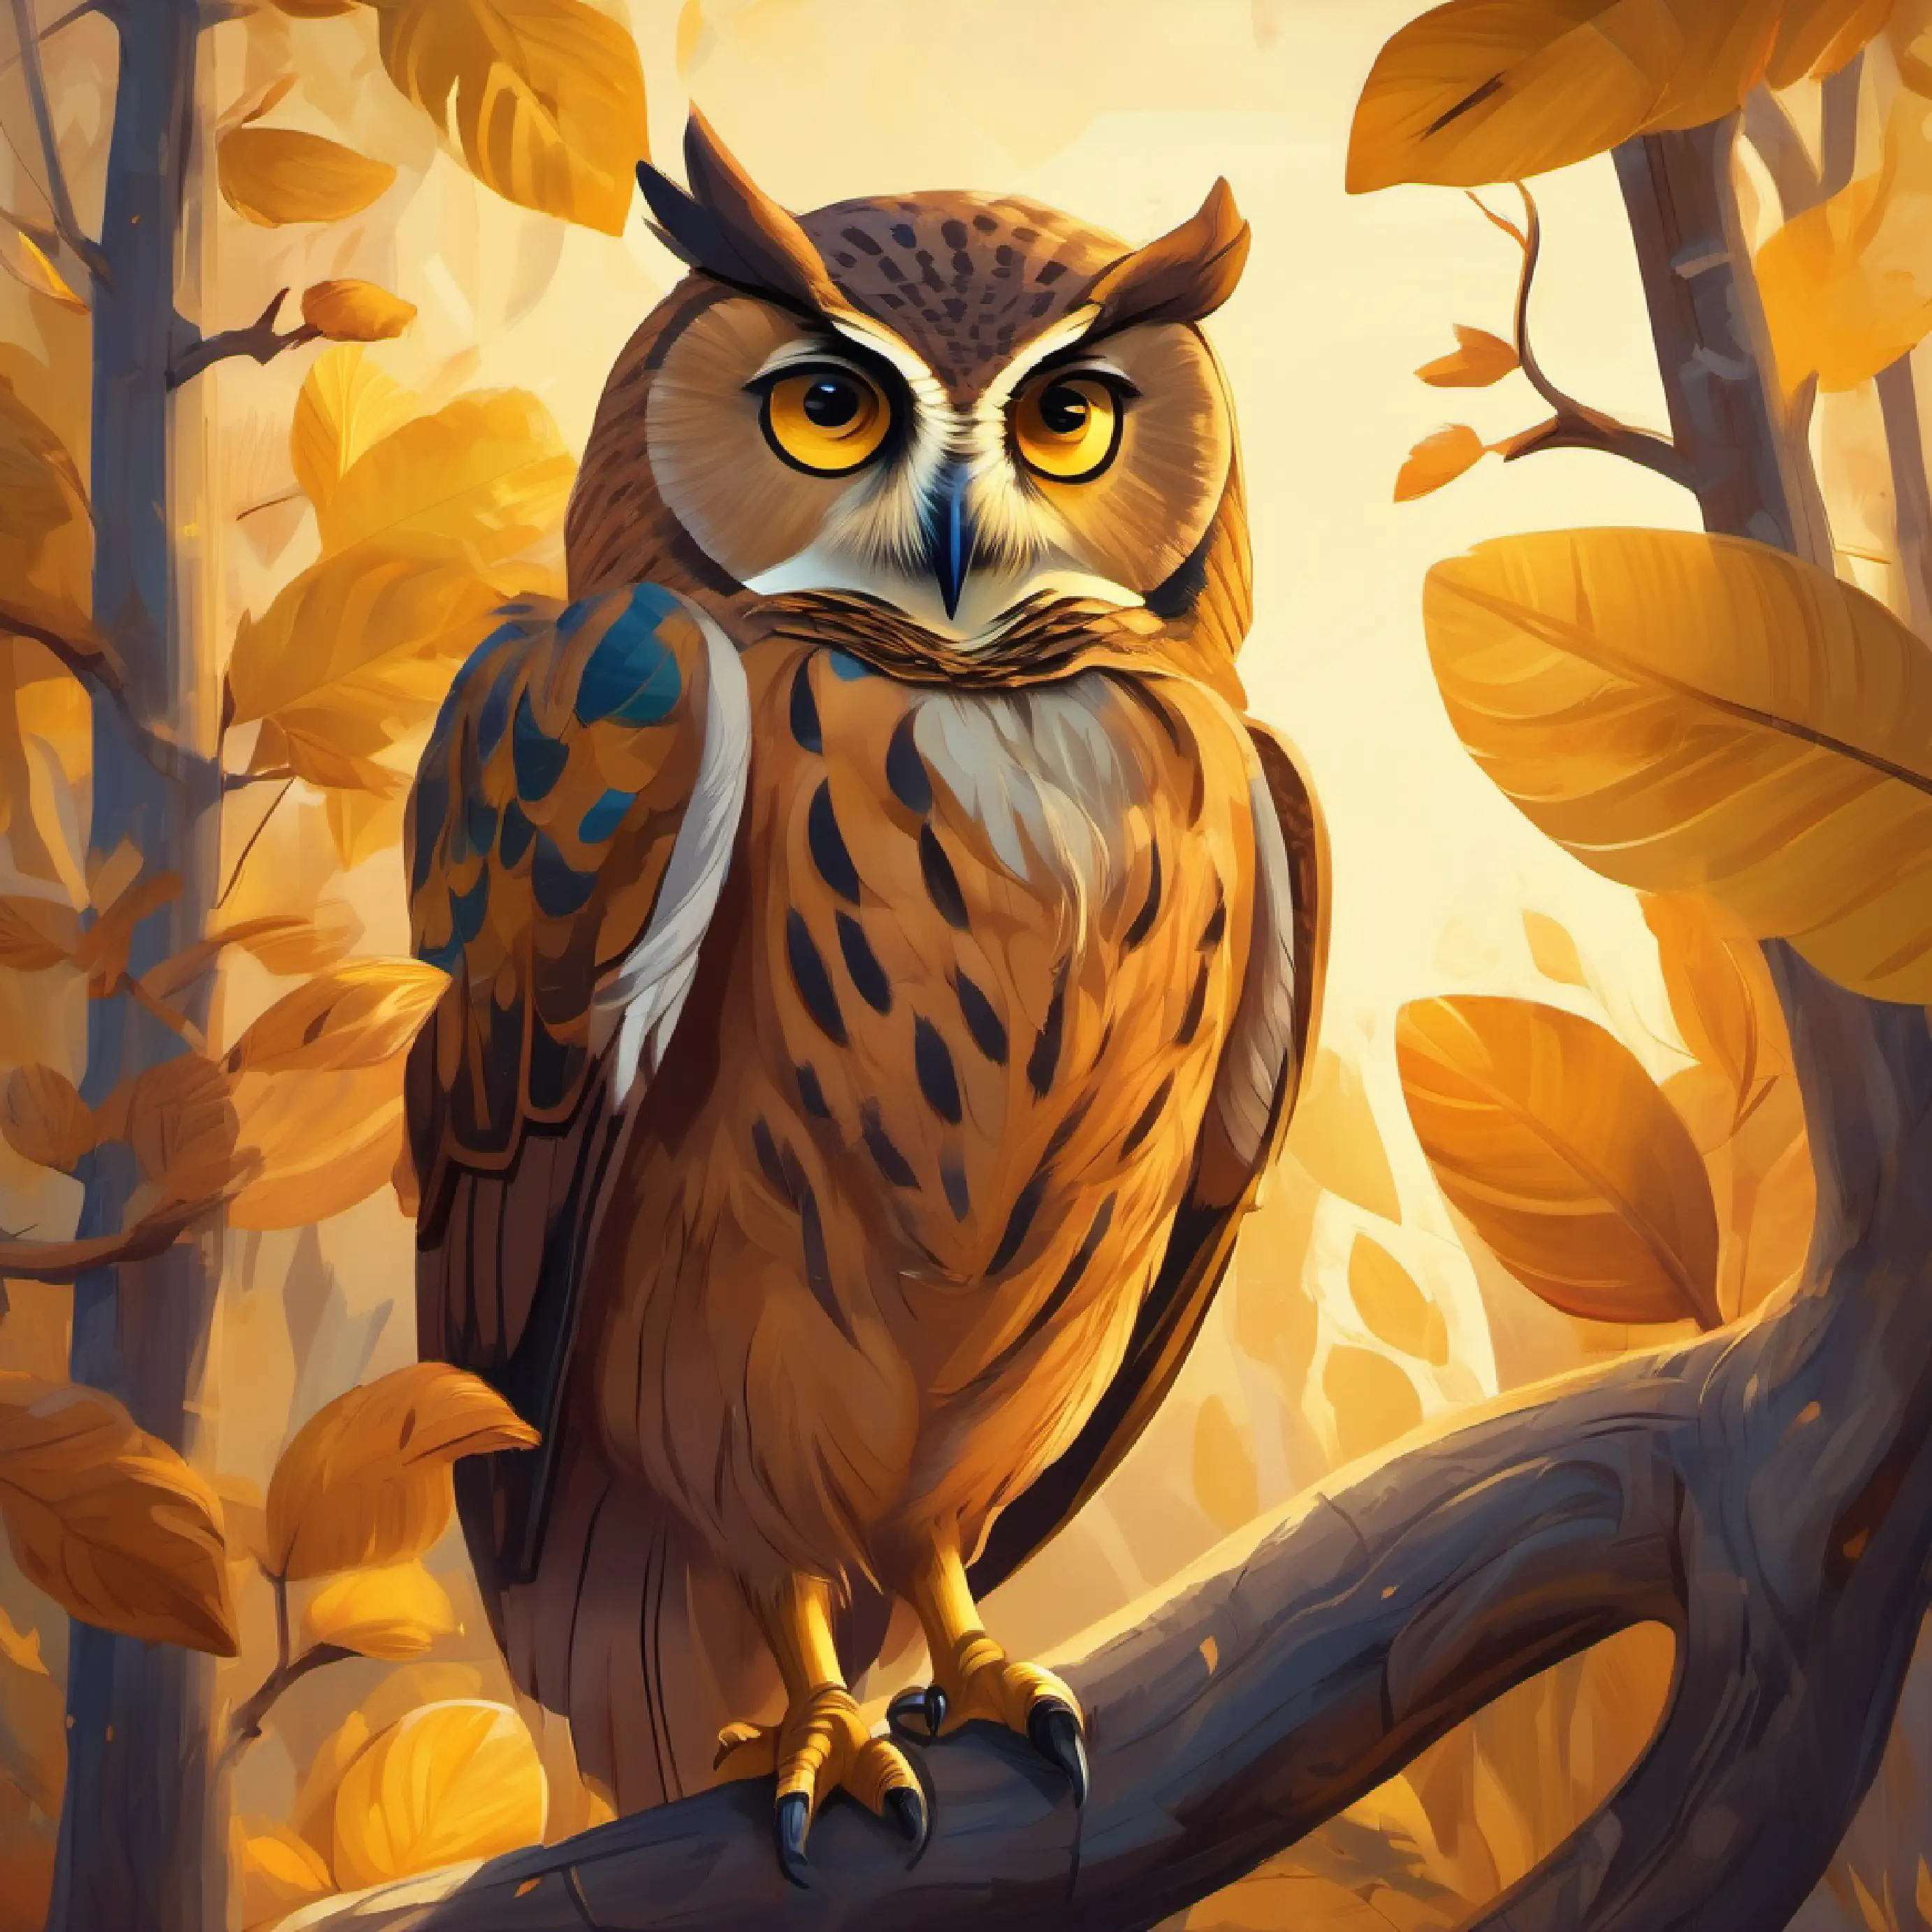 A big owl with brown feathers and wide, sleepy eyes joins A bright, small bird with yellow feathers and curious eyes for an early morning and also enjoys the rewards.